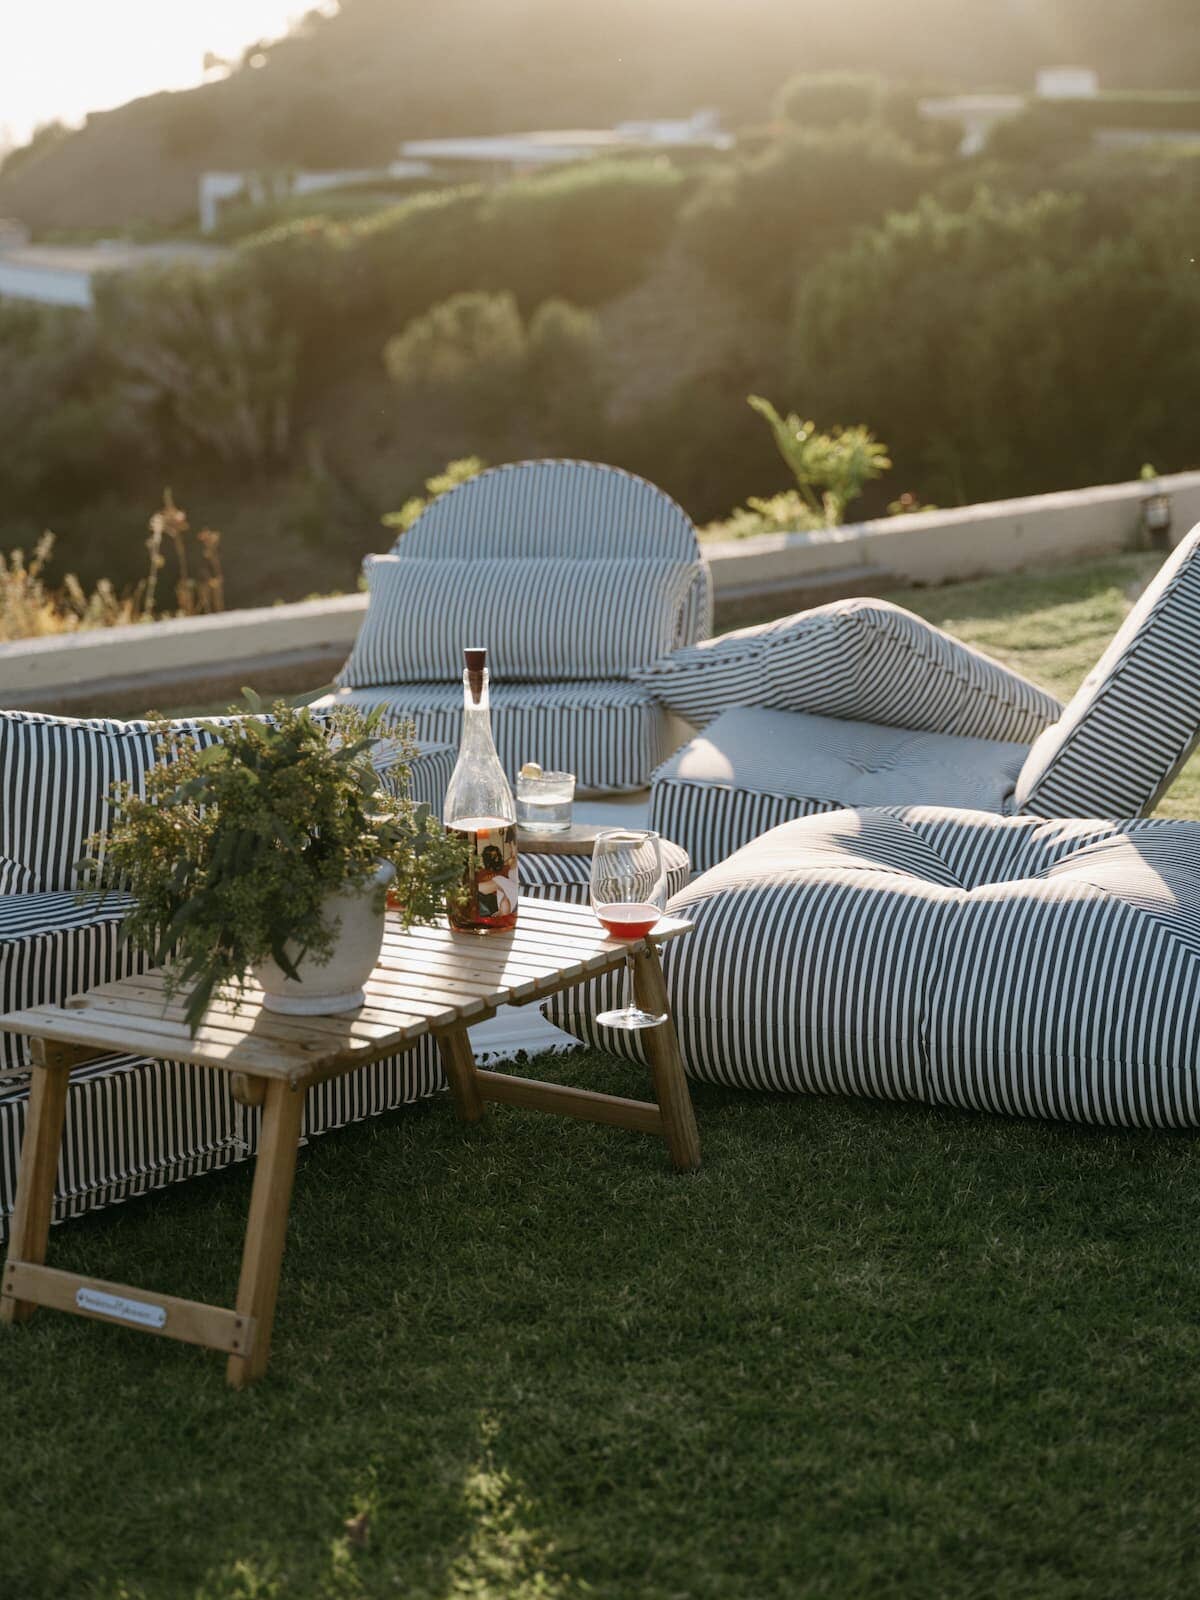 Outdoor picnic setting with a folding table and scattered floor cushions on the grass